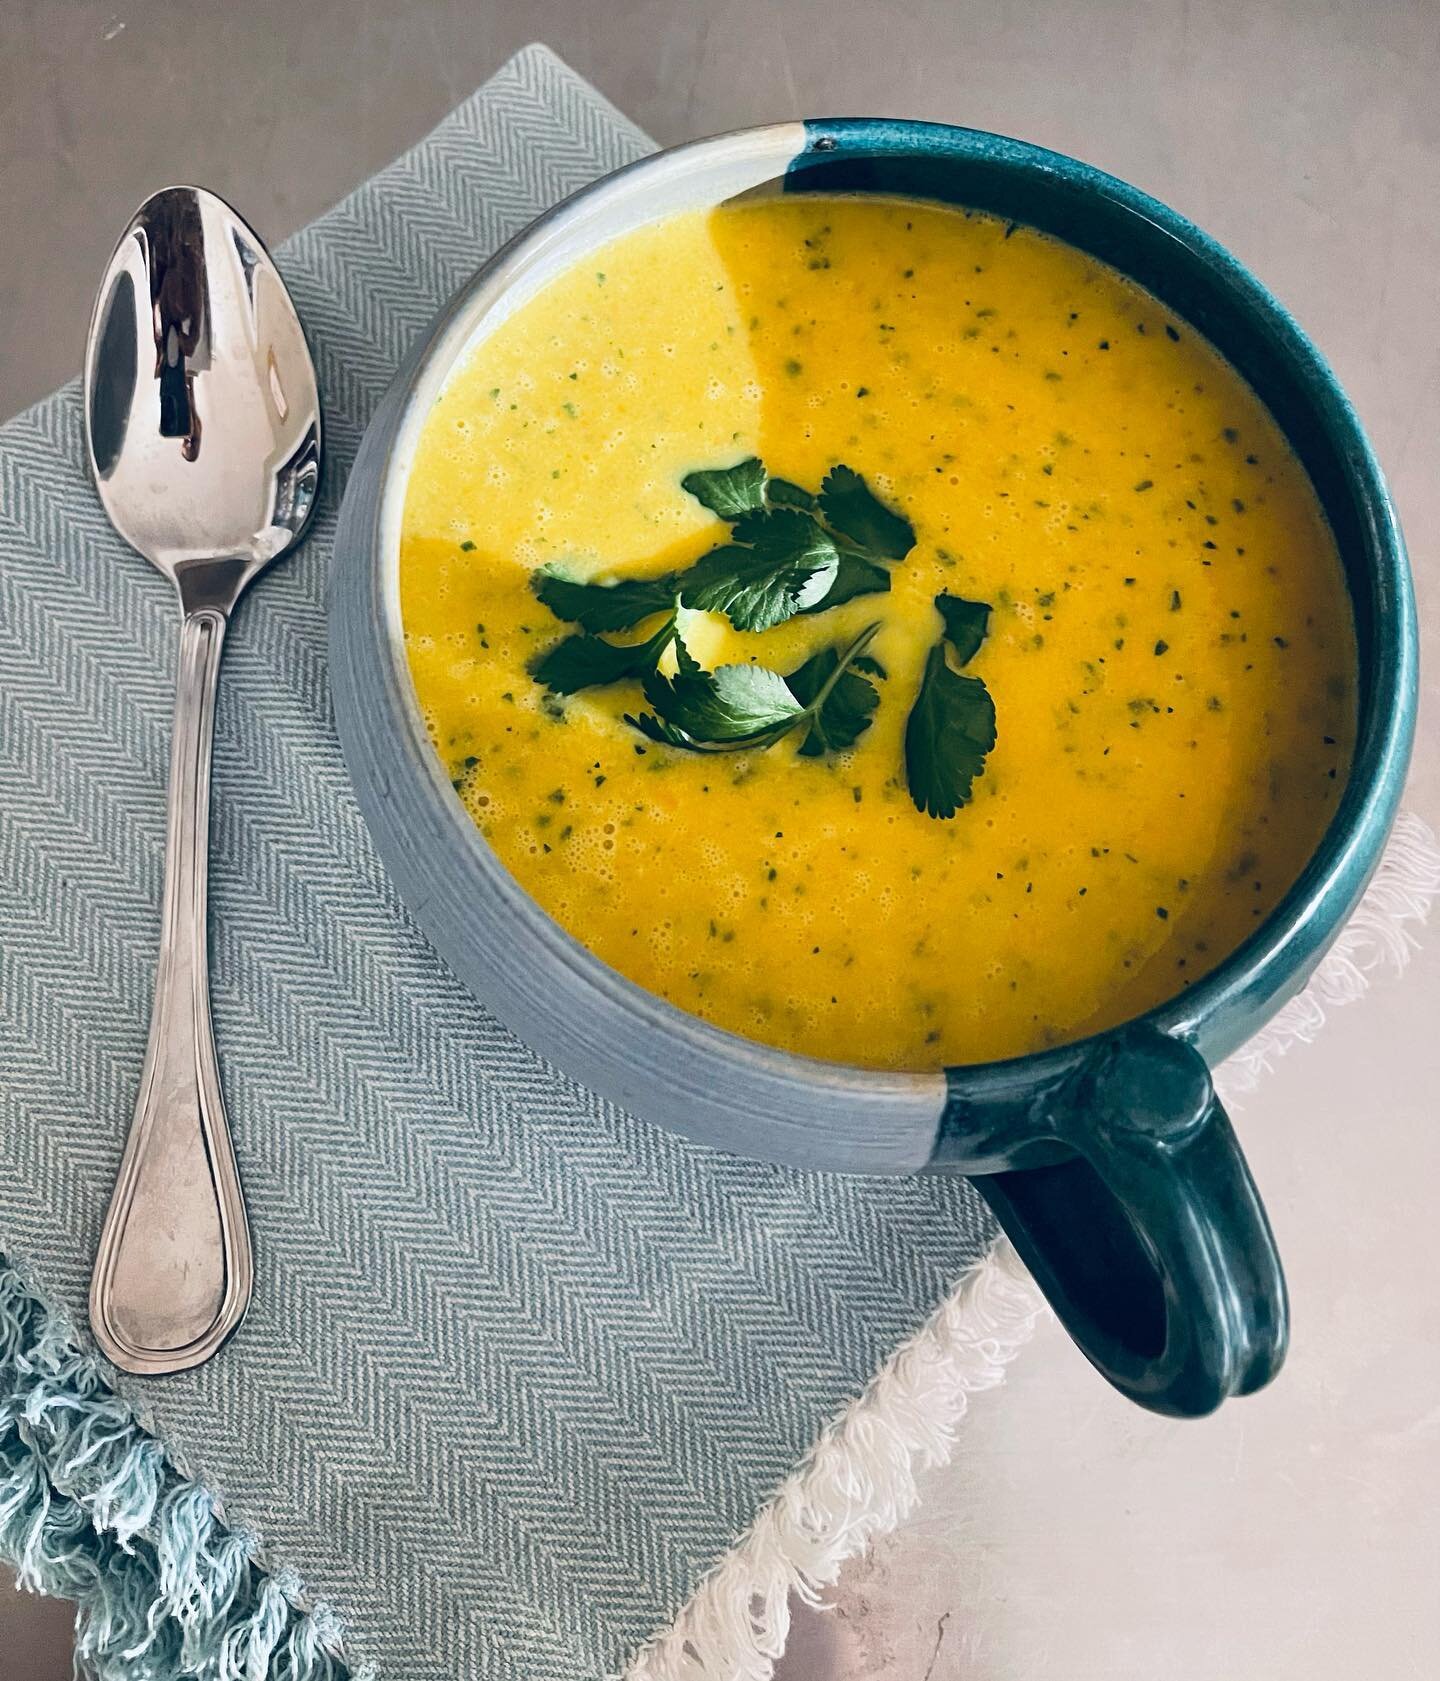 A great way to stay on track for the week is to prep ahead&hellip; take a few hours in the kitchen to roast, stew and soup so you have a head start on healthy food for the week!  Try this super simple Carrot-Cilantro soup&hellip; warming with a hint 